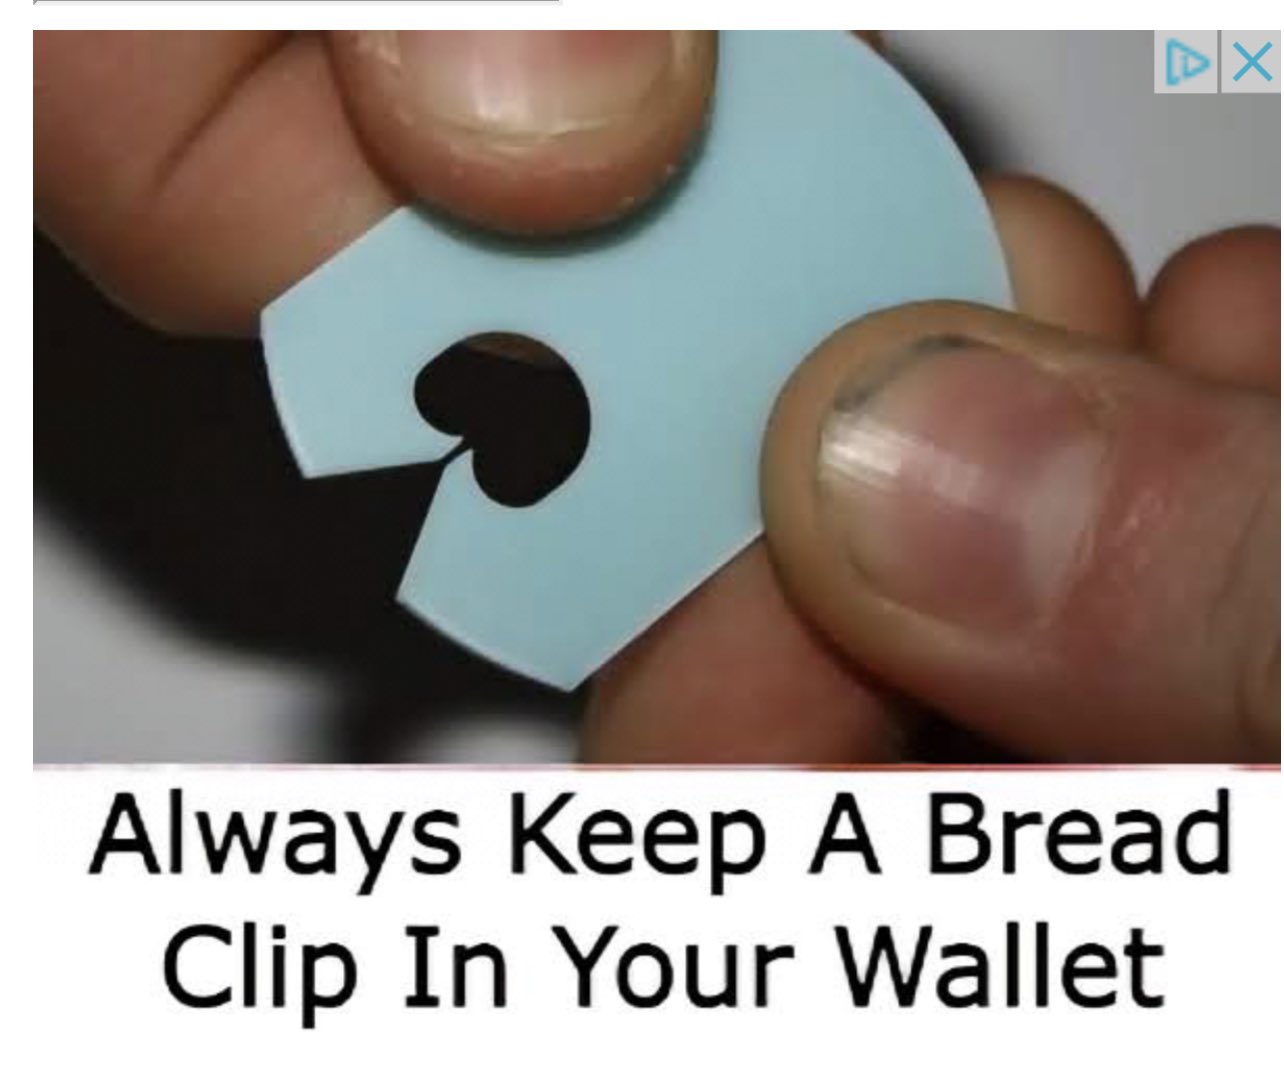 SAFDIE on X: “…so you can replace the bread clip you lost.”   / X